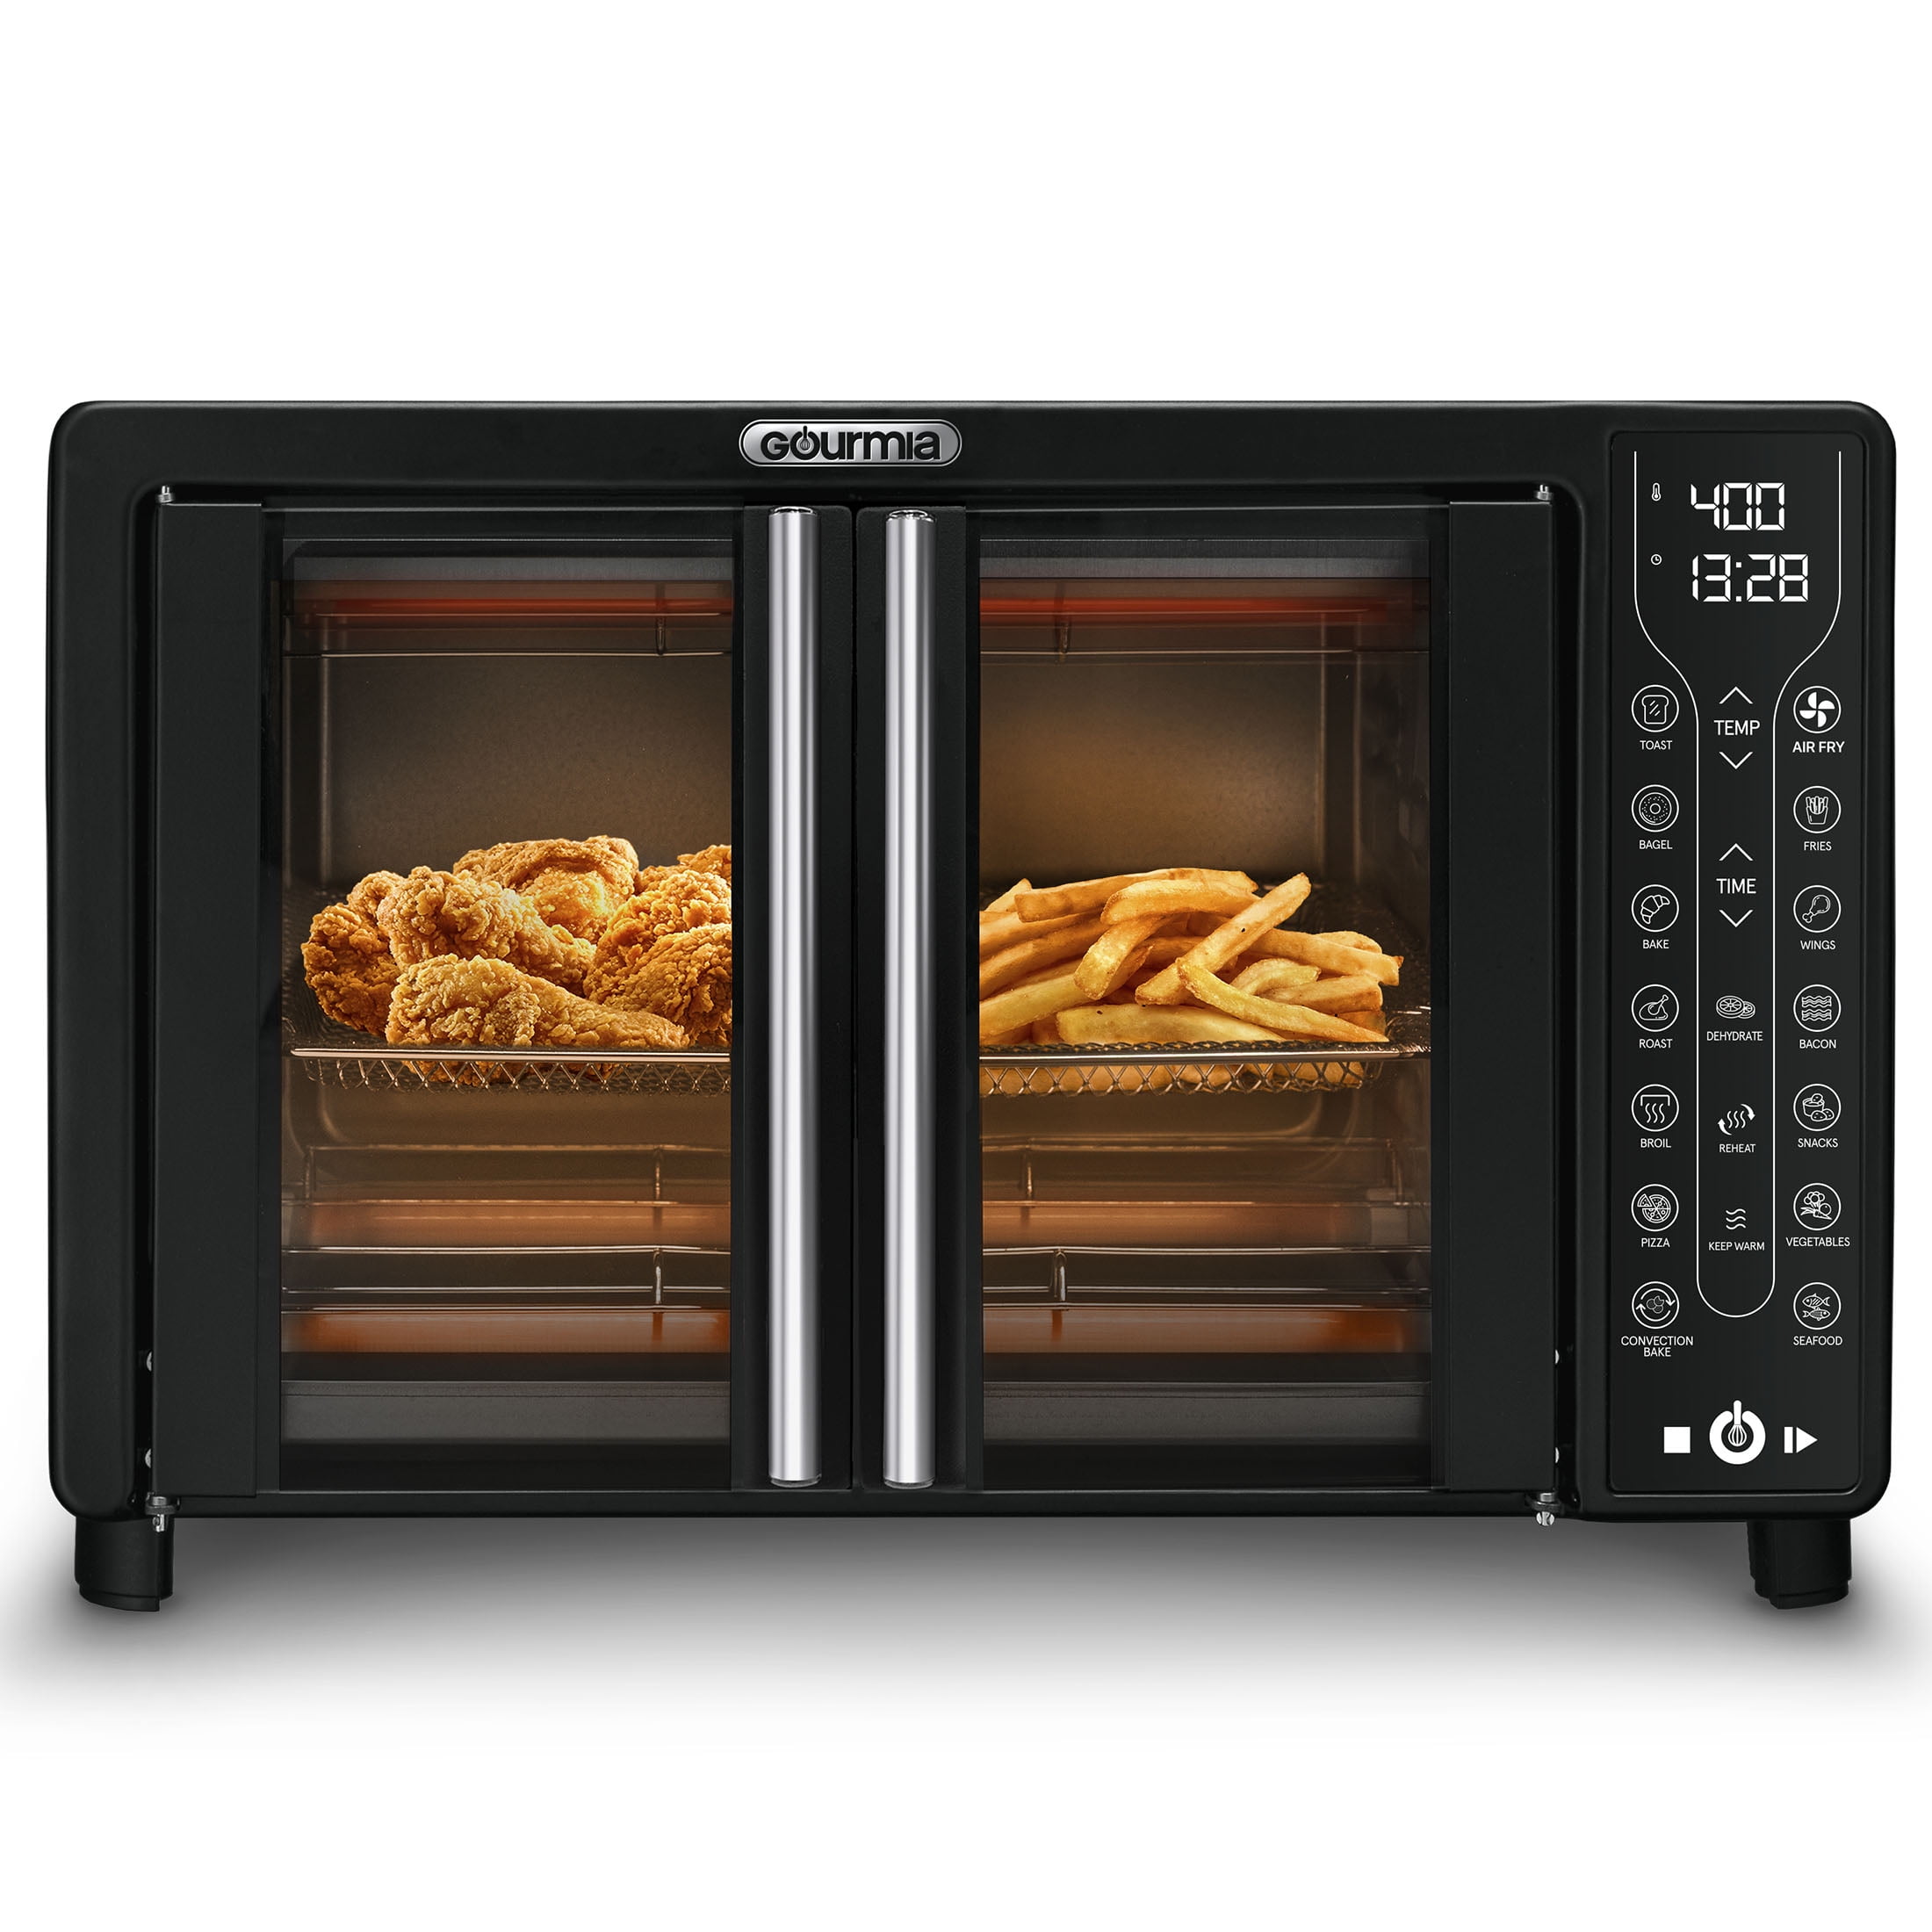 Gourmia Digital Stainless Steel Toaster Oven Air Fryer – Stainless Steel 1  ct